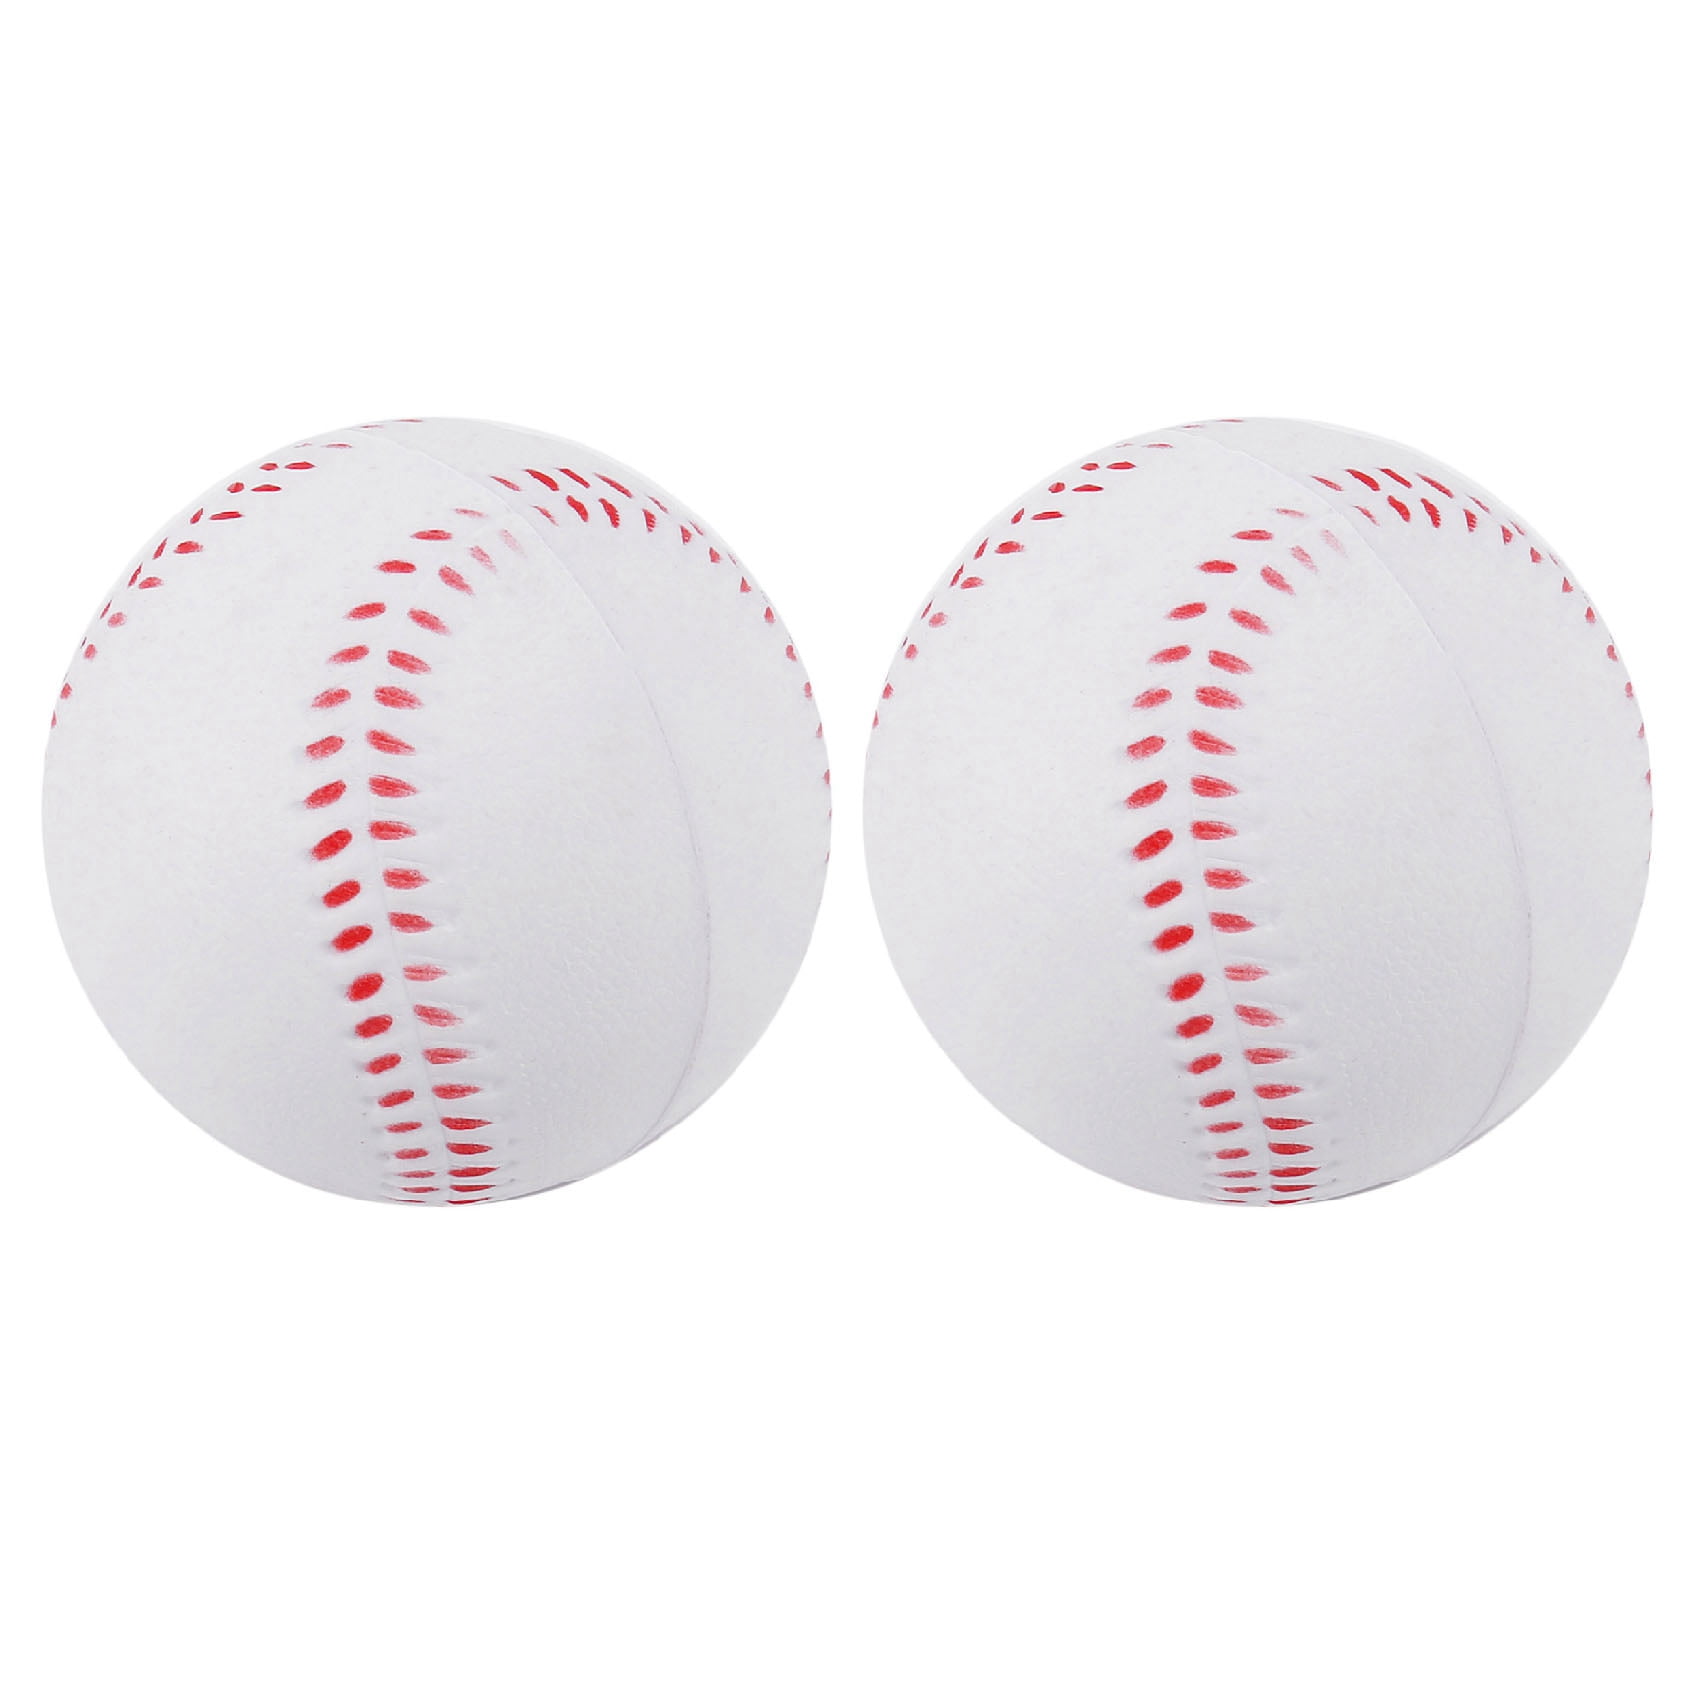 Dasing Sport Baseball Reduced Impact Baseball 10 Inch Youth Softball for Adults for Game Competitions Pitching Catching Training 